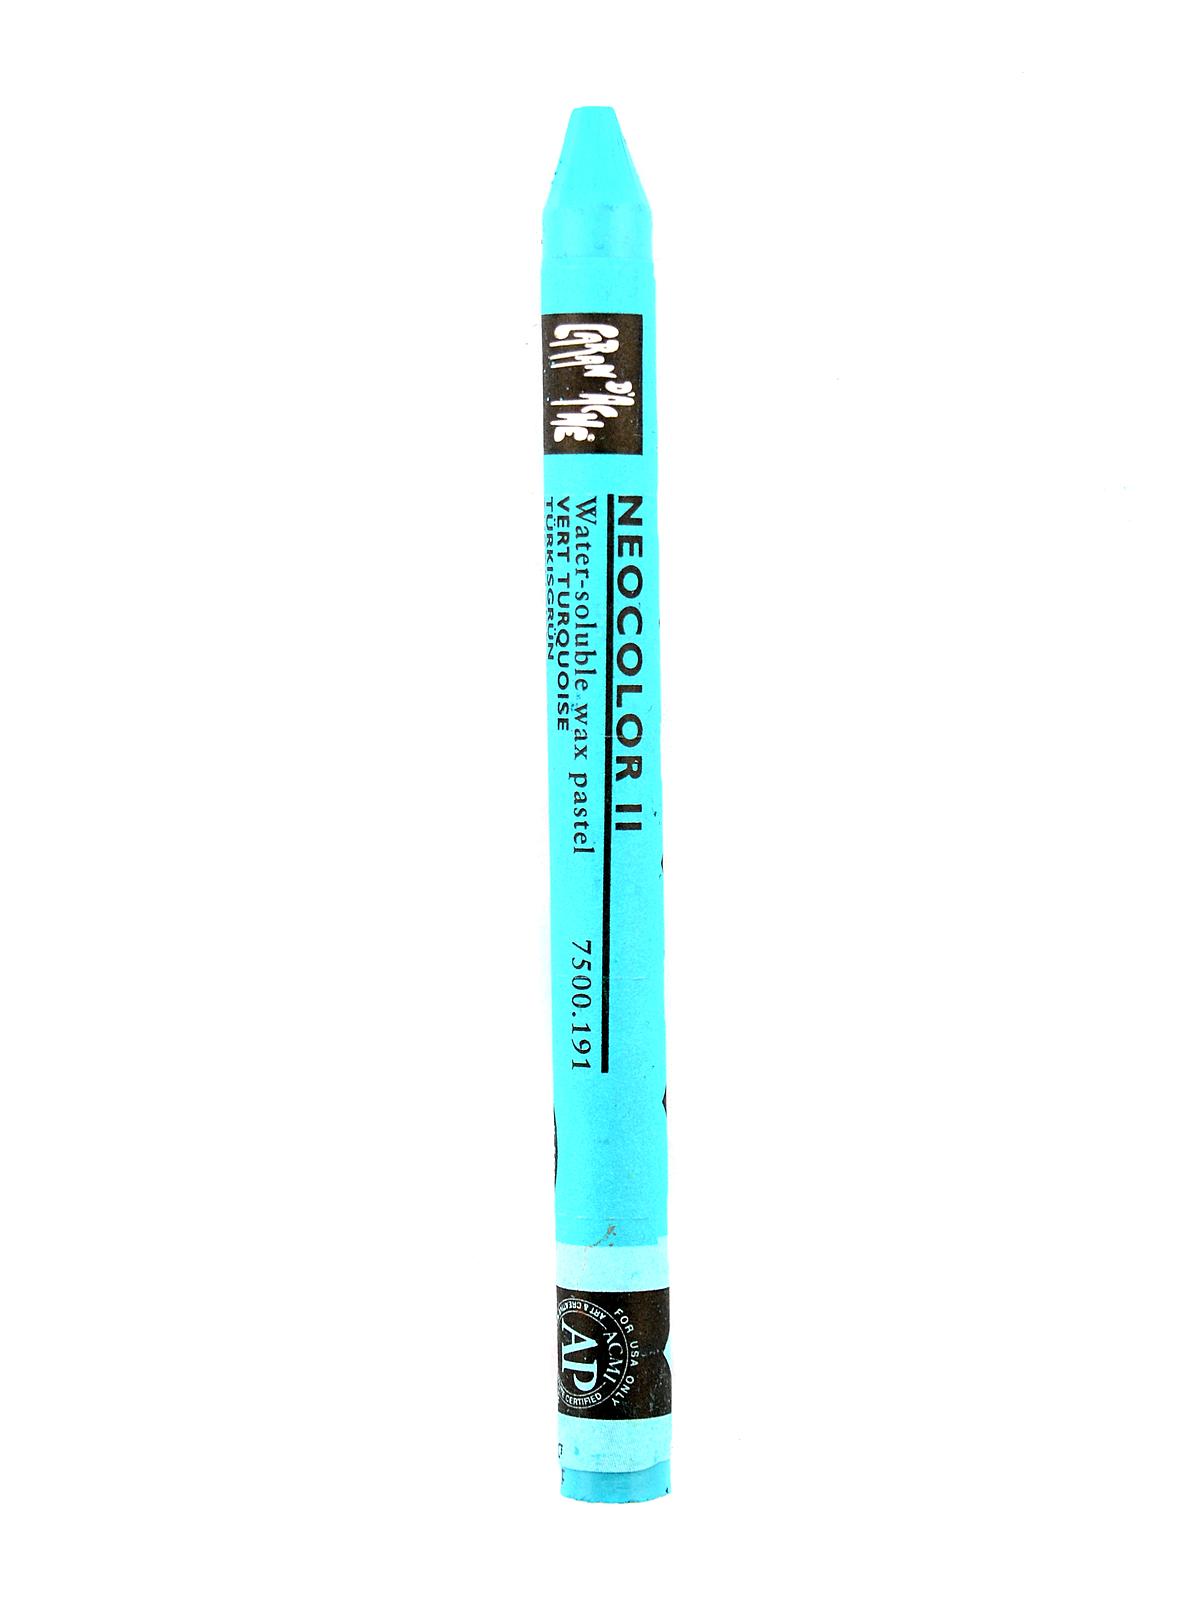 Neocolor Ii Aquarelle Water Soluble Wax Pastels Turquoise Green